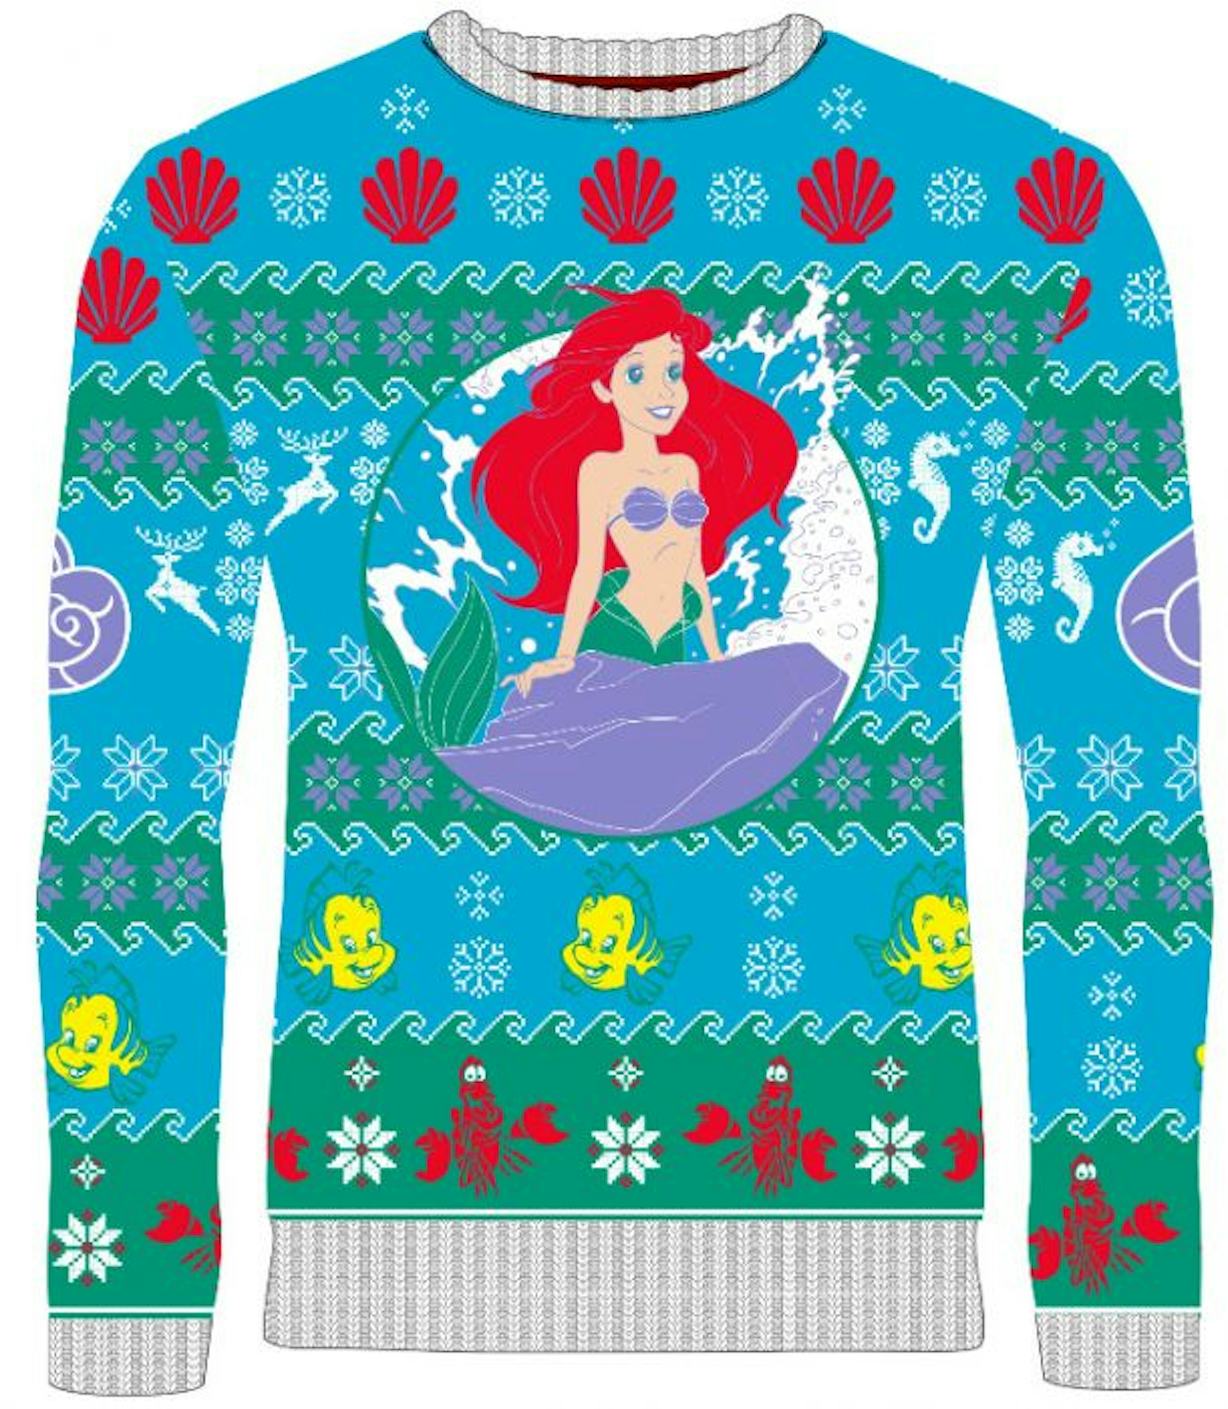 These Ugly Disney Christmas Sweaters Are A Must For Holiday Parties